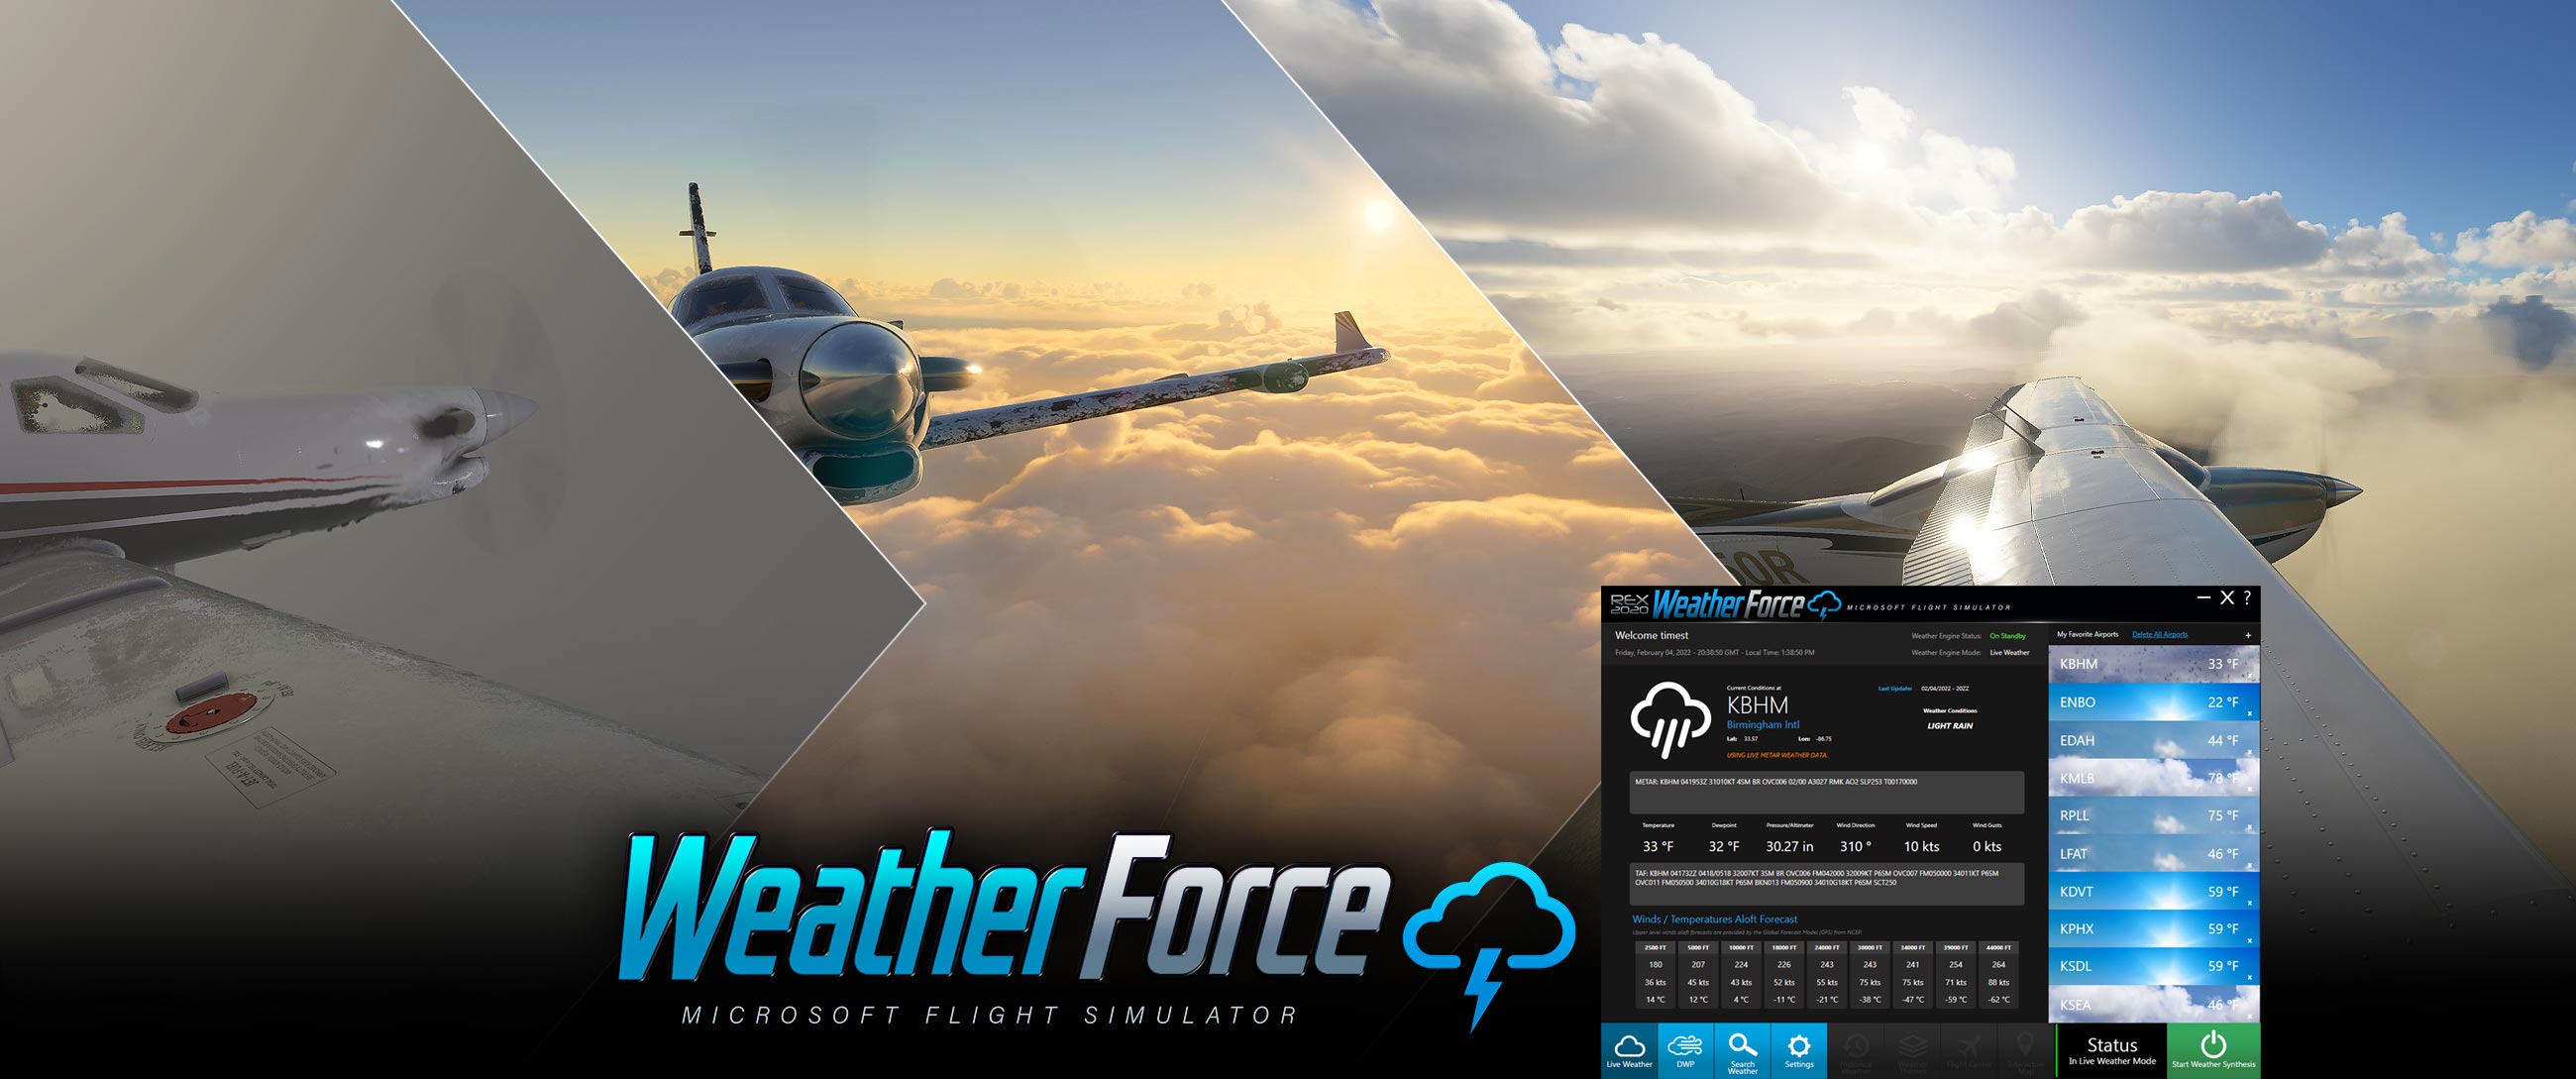 REX Weather Force New Weather Engine